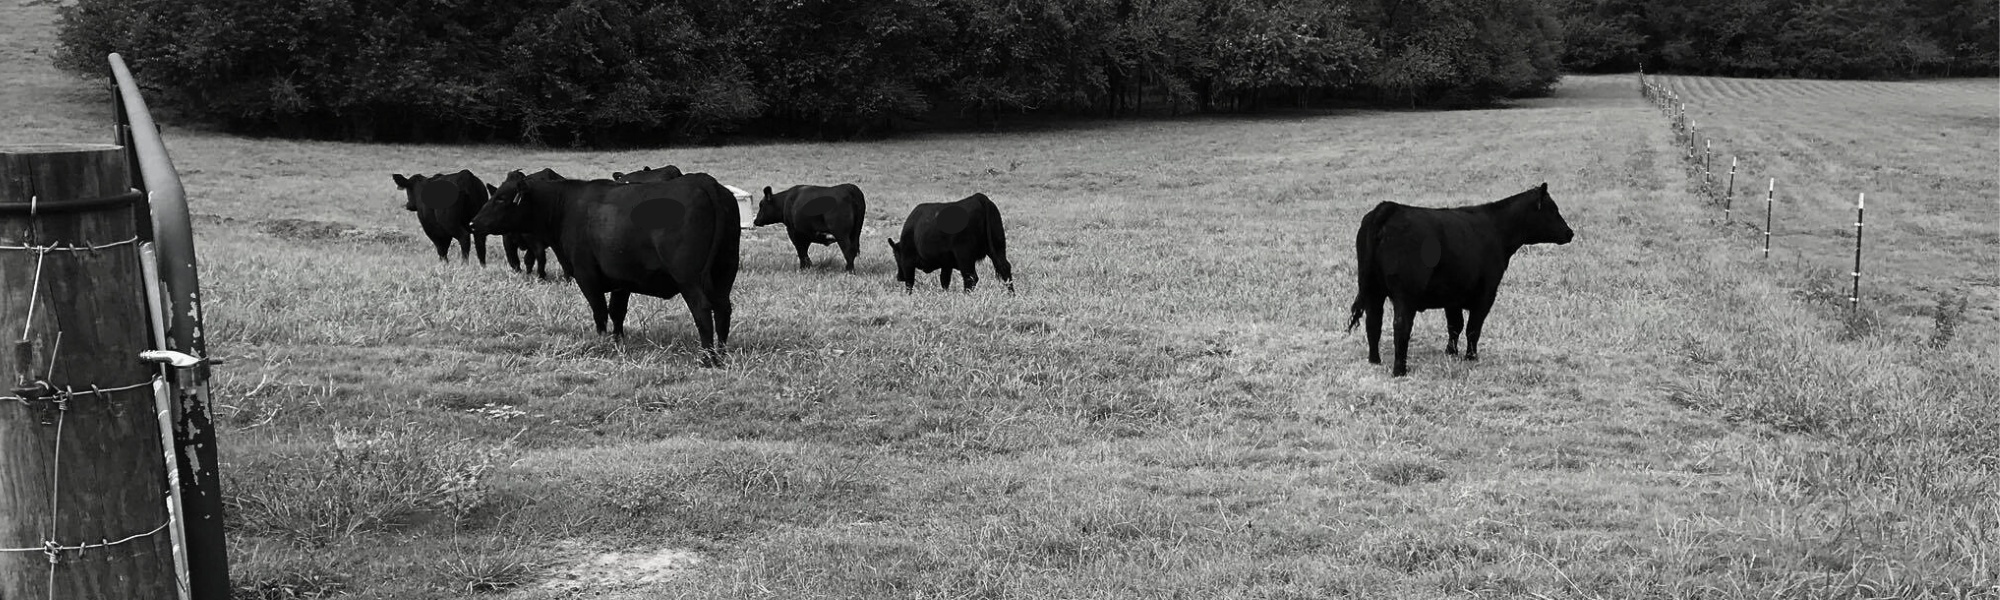 Black Angus Cattle Grazing in pasture